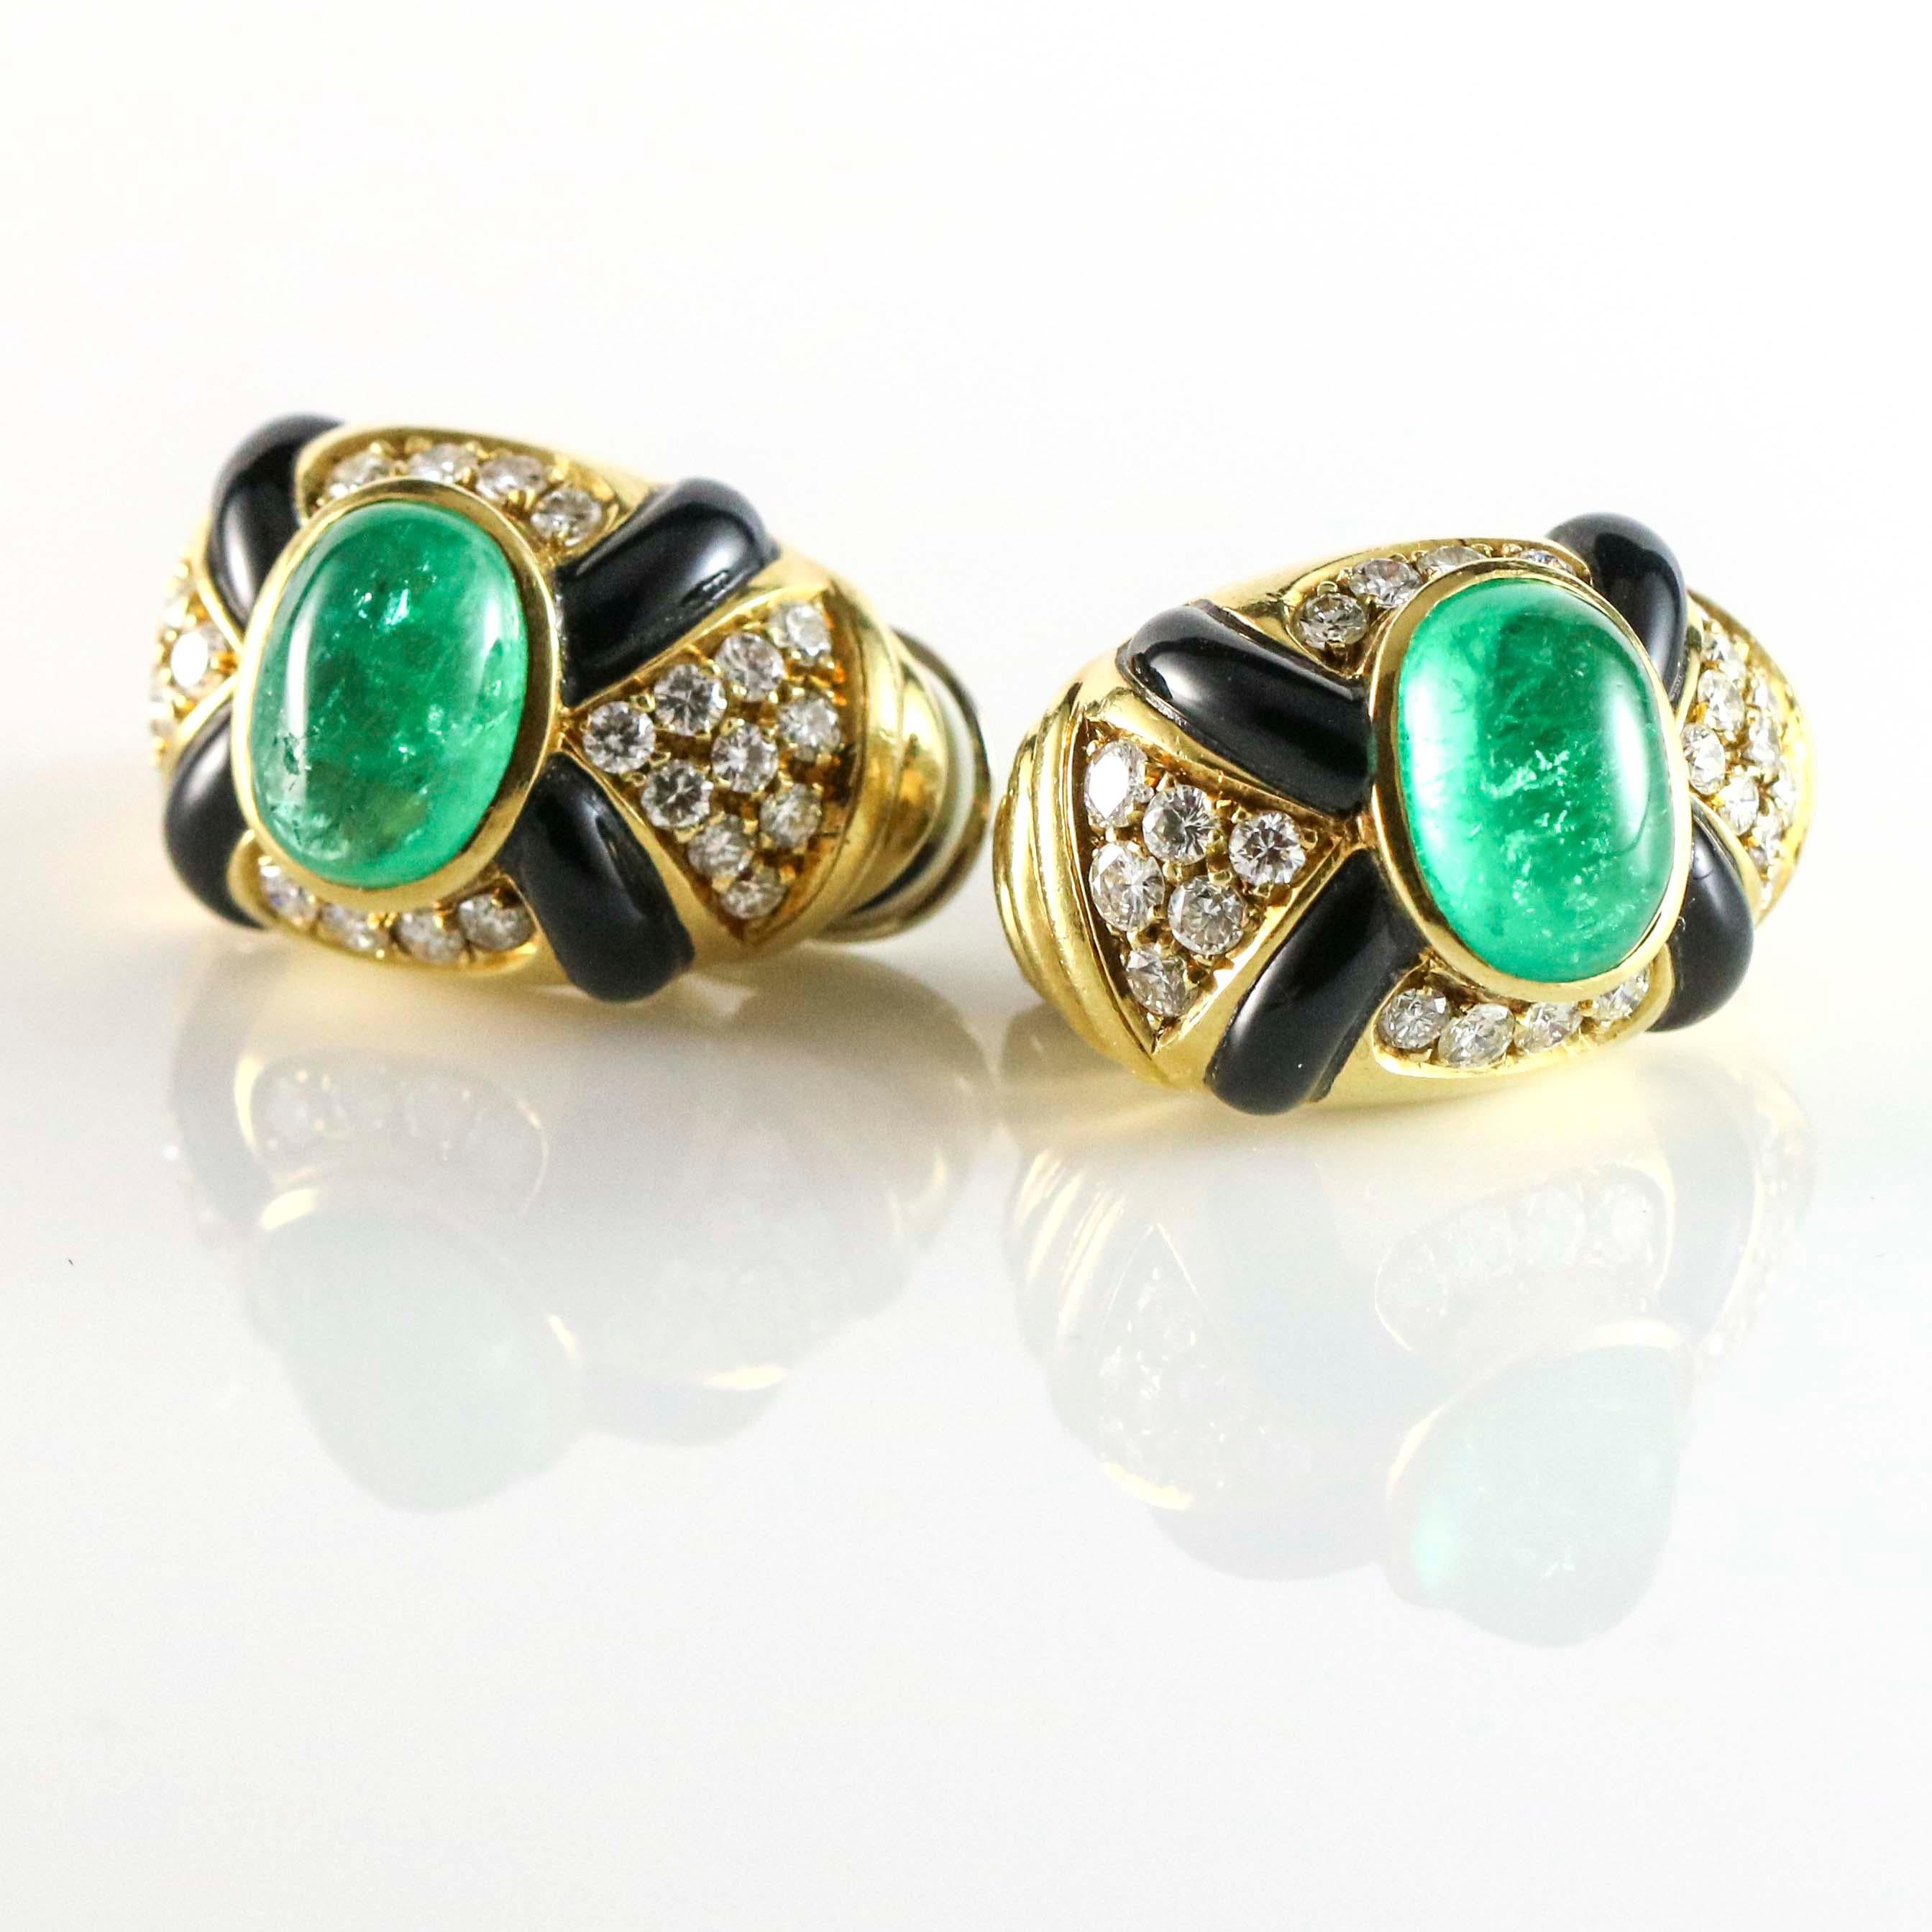 Vintage earclips with large cabochon emeralds, inlay black onyx and prong set with round diamonds. The earrings are crafted of 18 karat yellow gold. Clip-on backs. Estimated total carat weight of Emeralds, 7 carats. Diamond total carat weight, 2.8